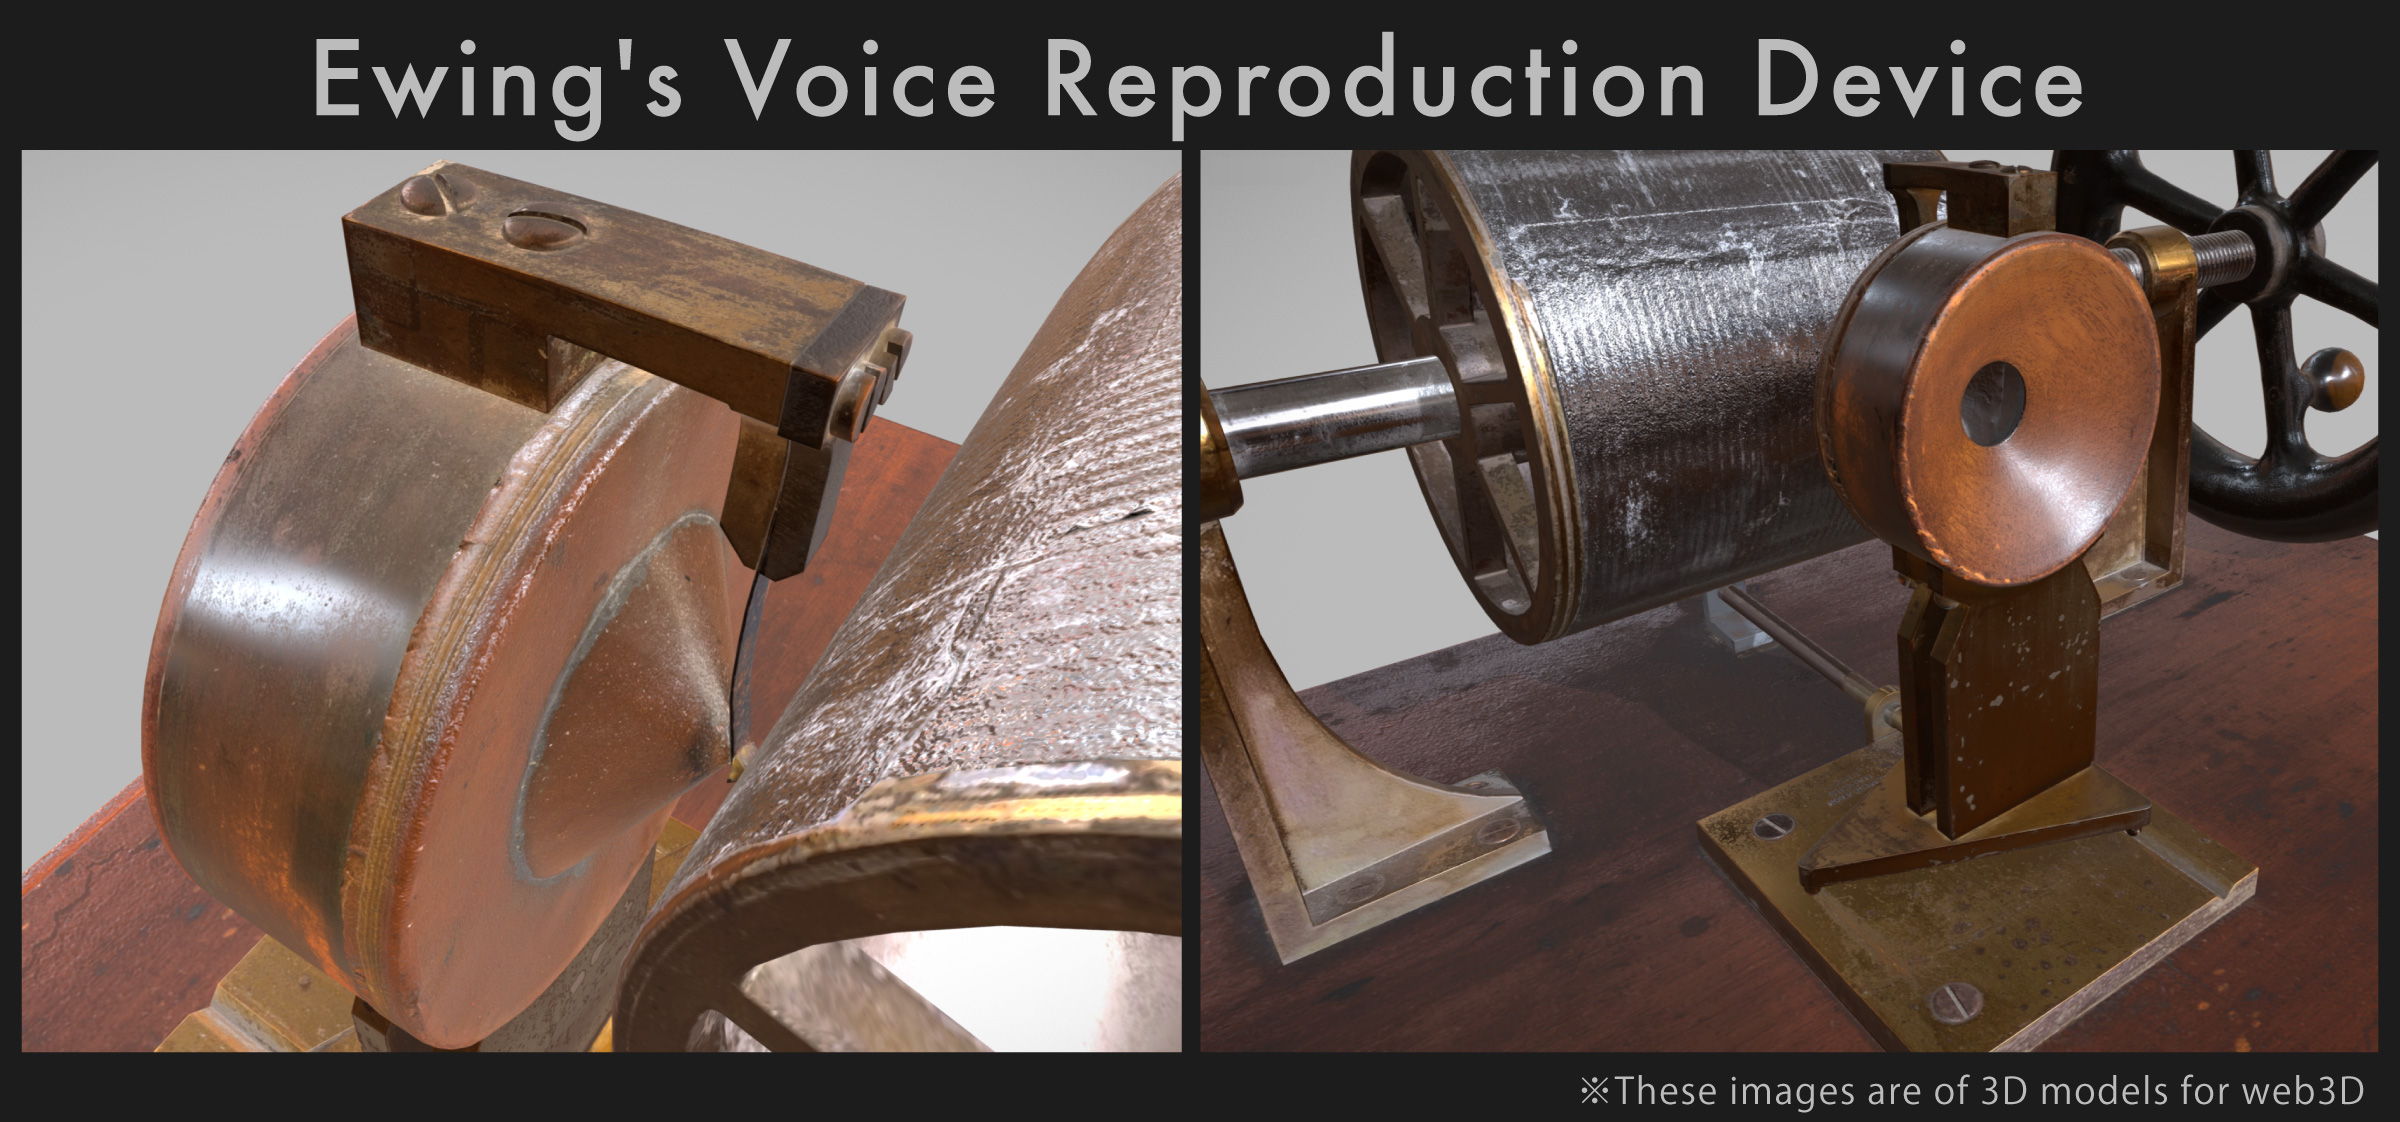 Ewing's Voice Reproduction Device 3D scanning model